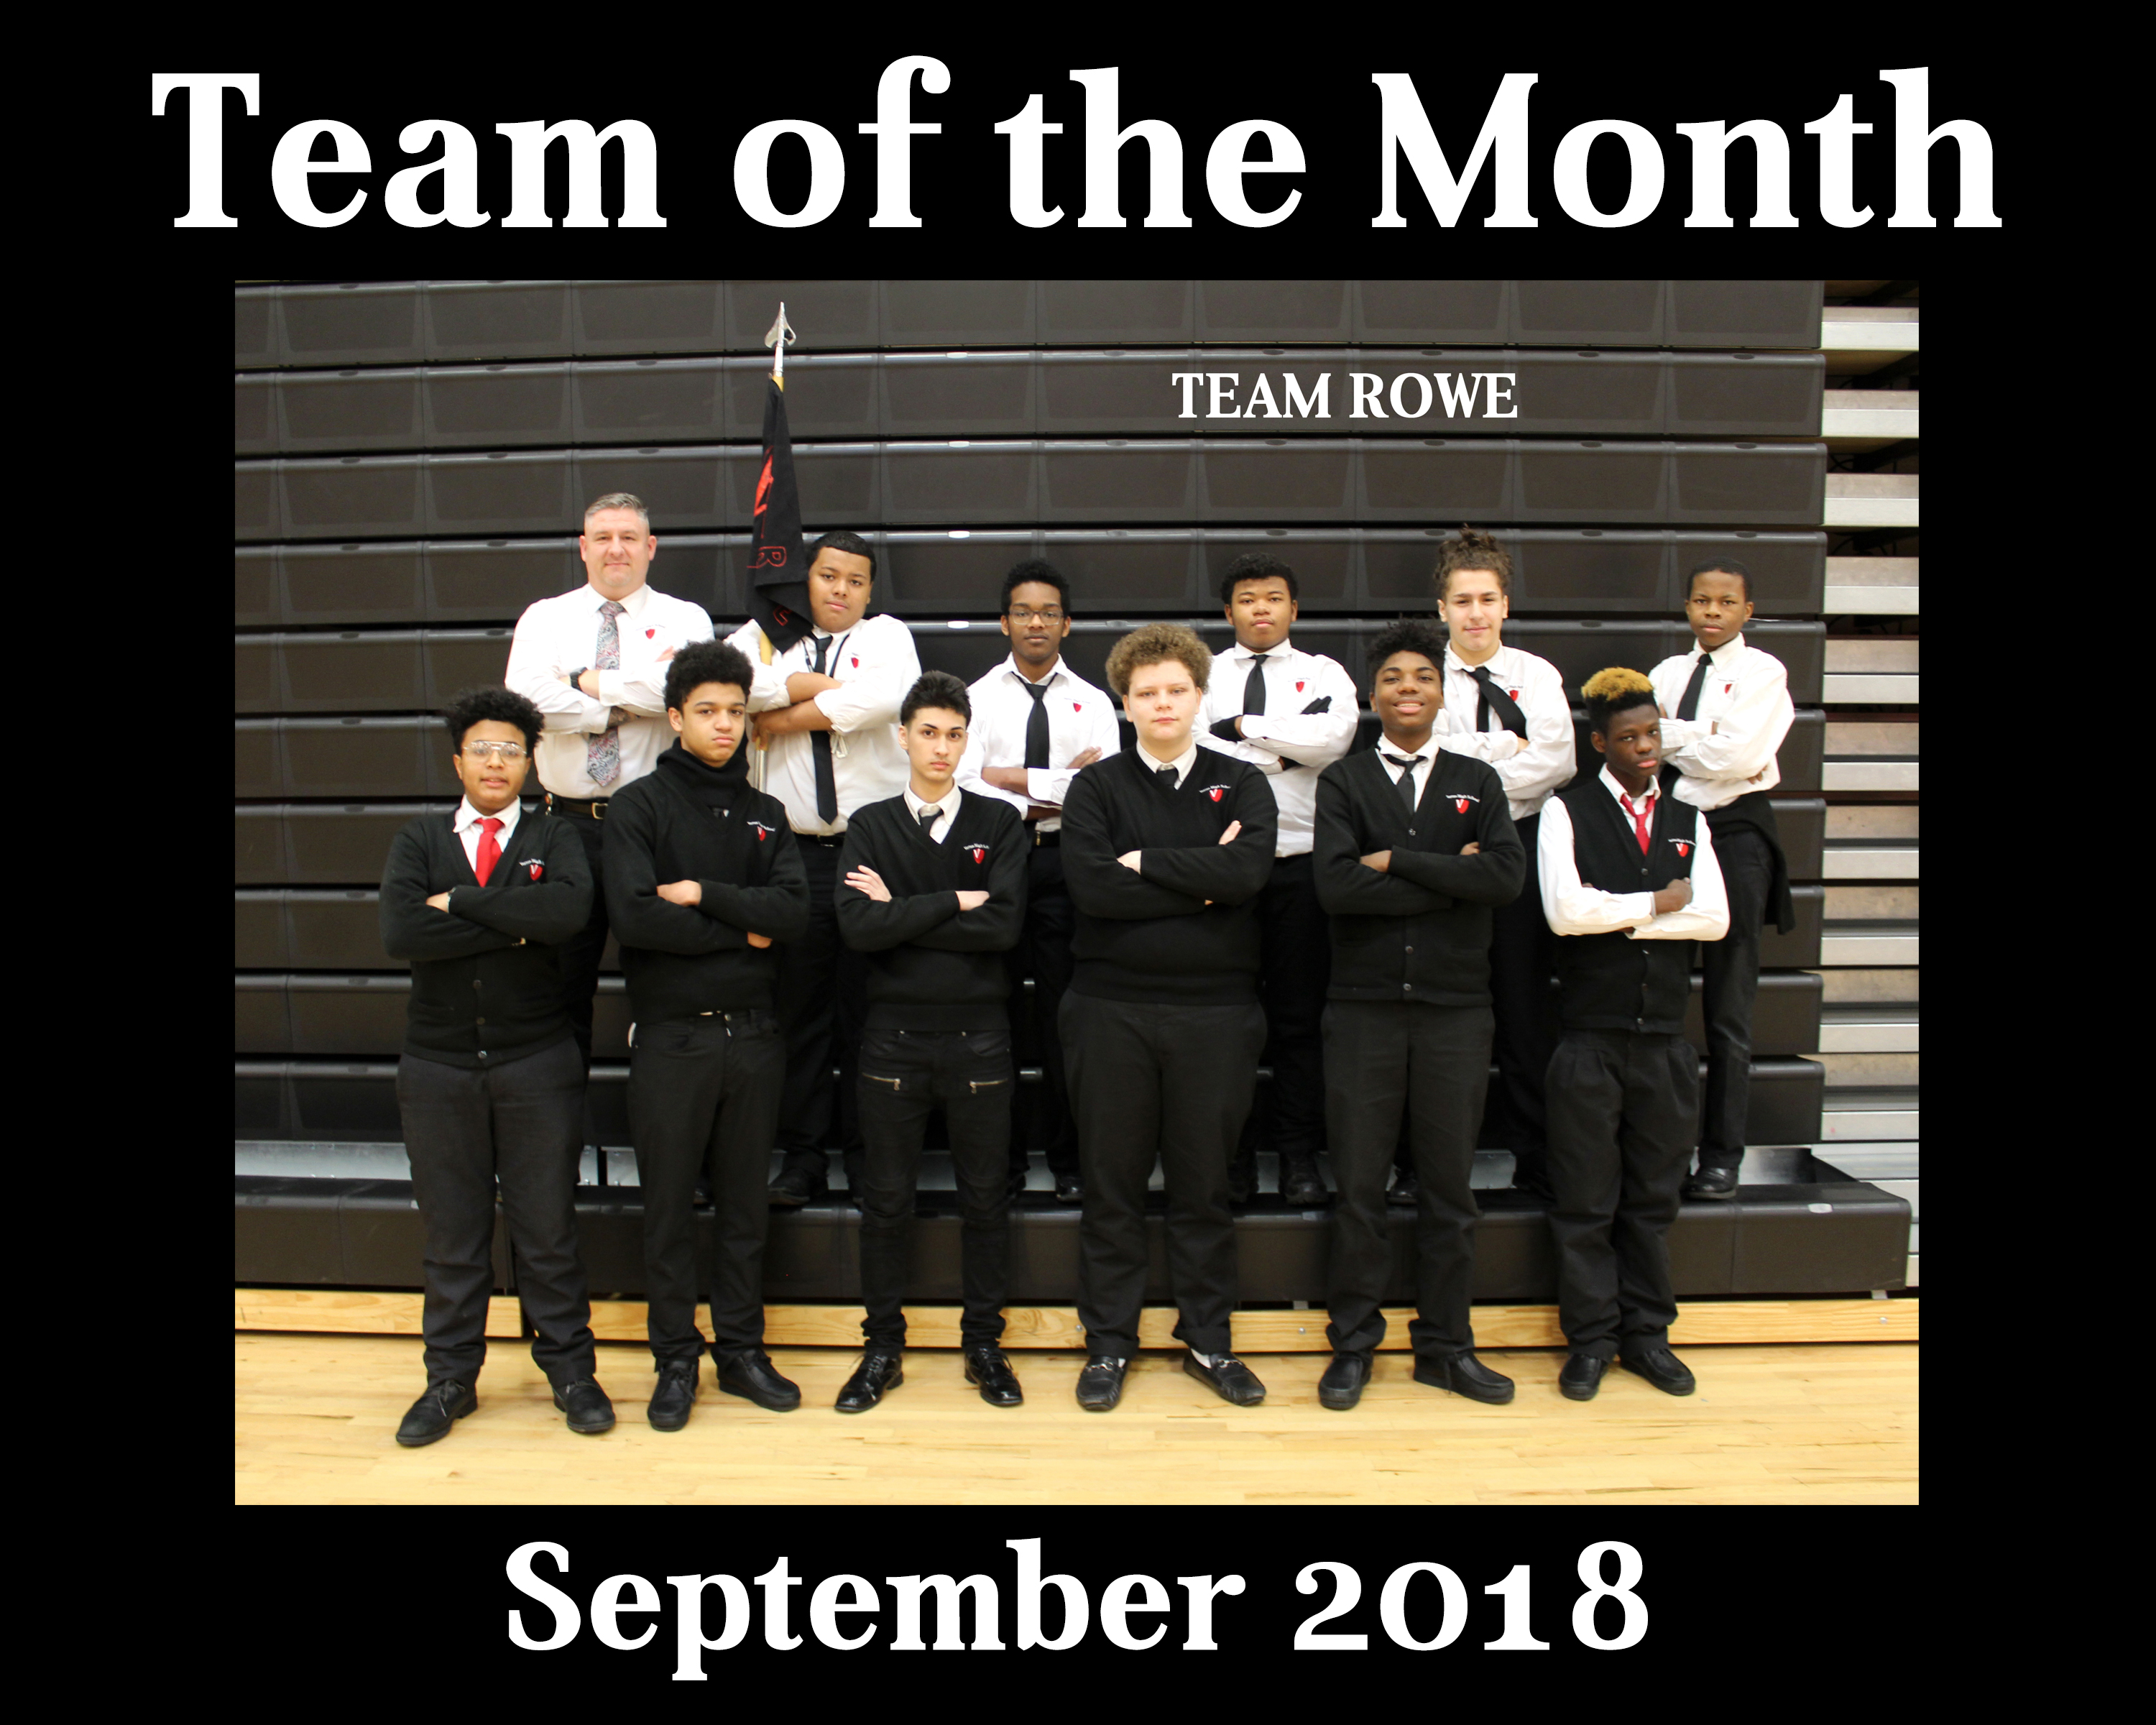 Team of the Month - September 2018